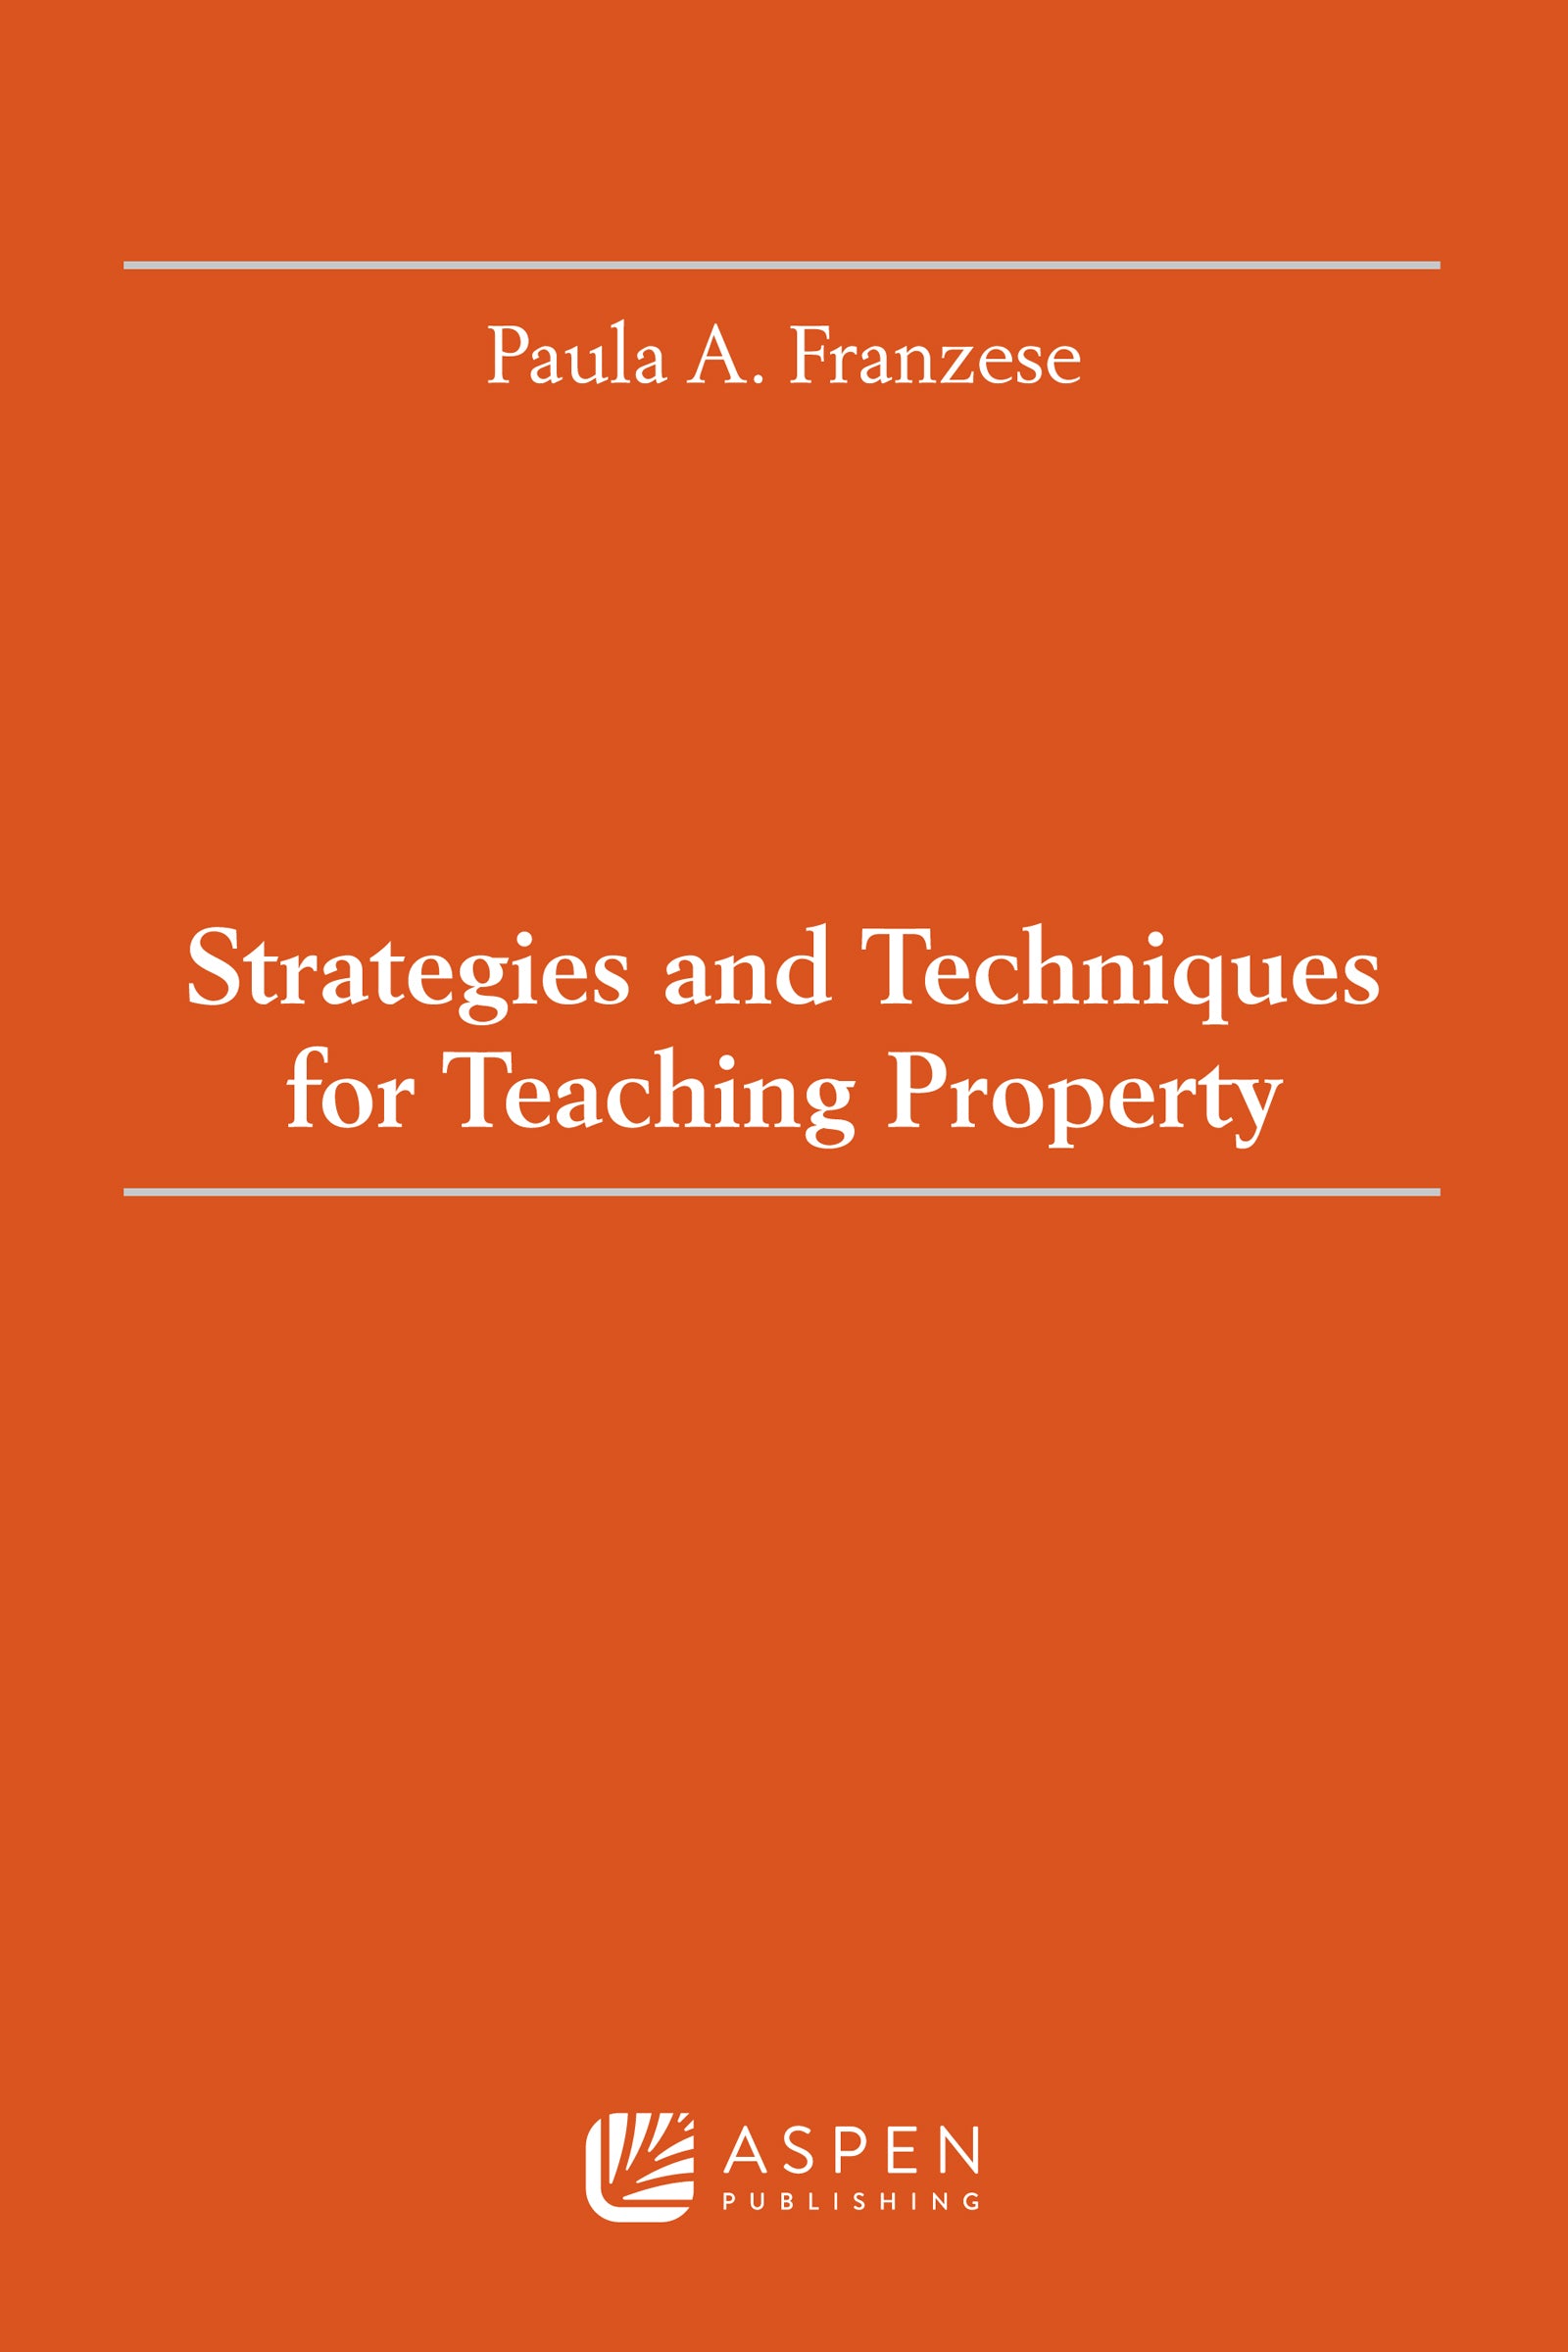 Strategies and Techniques for Teaching Property